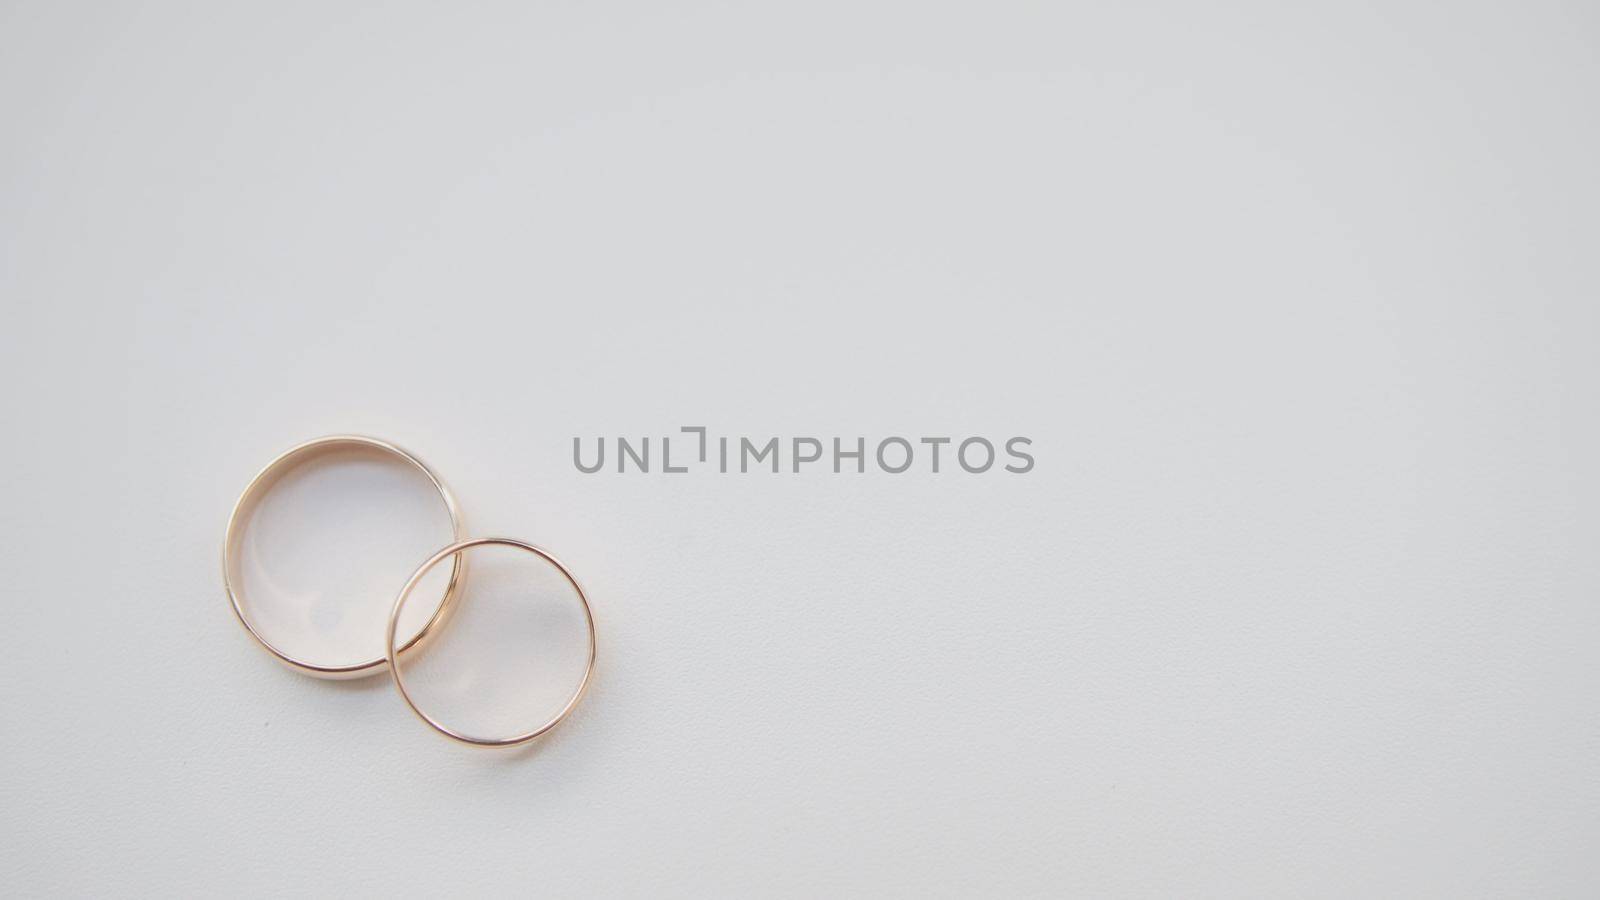 Golden wedding rings on white background by Studia72